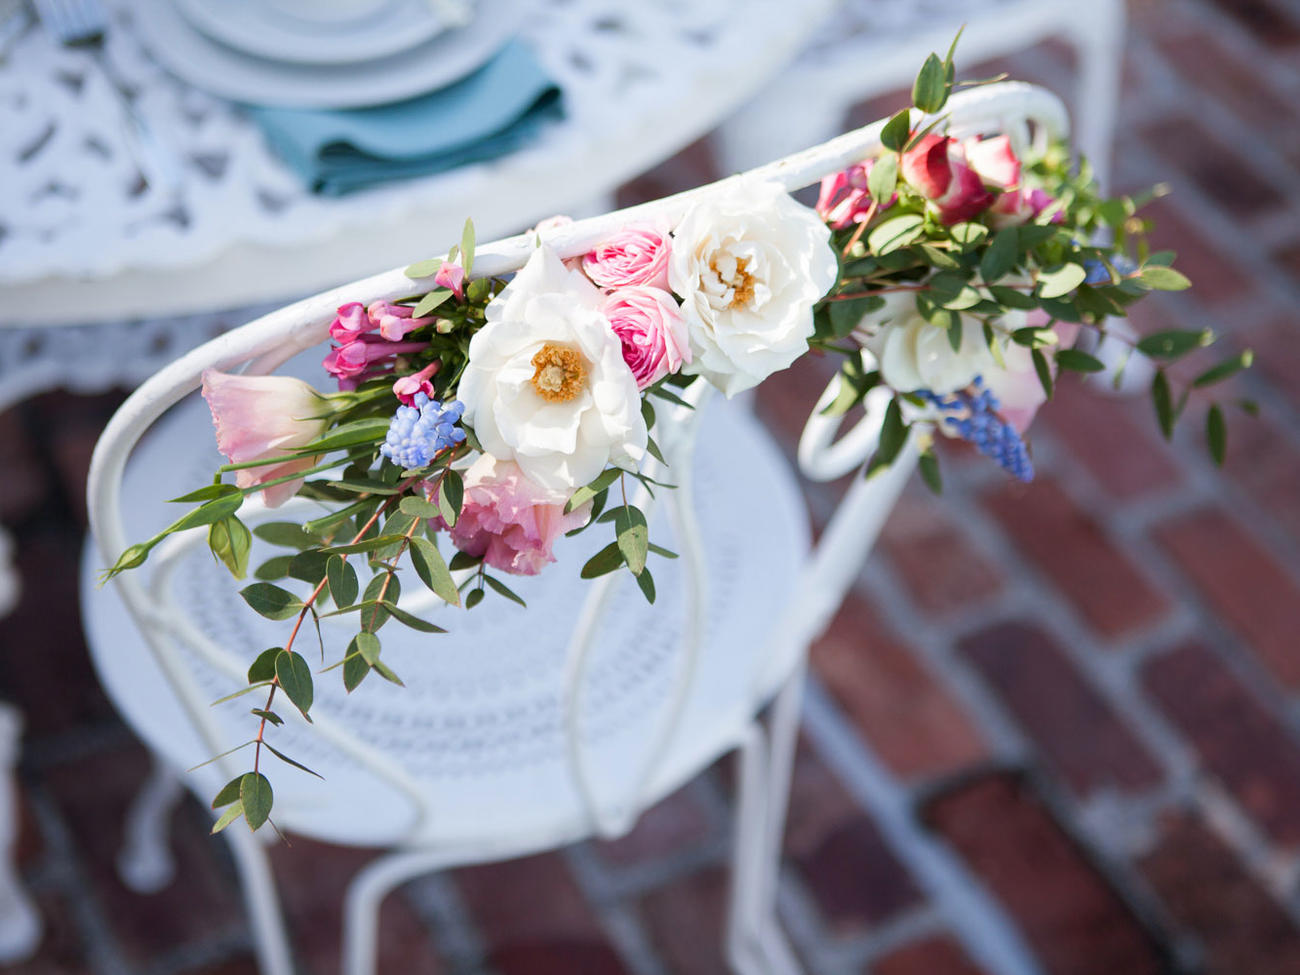 Top Wedding Floral Trends This Year